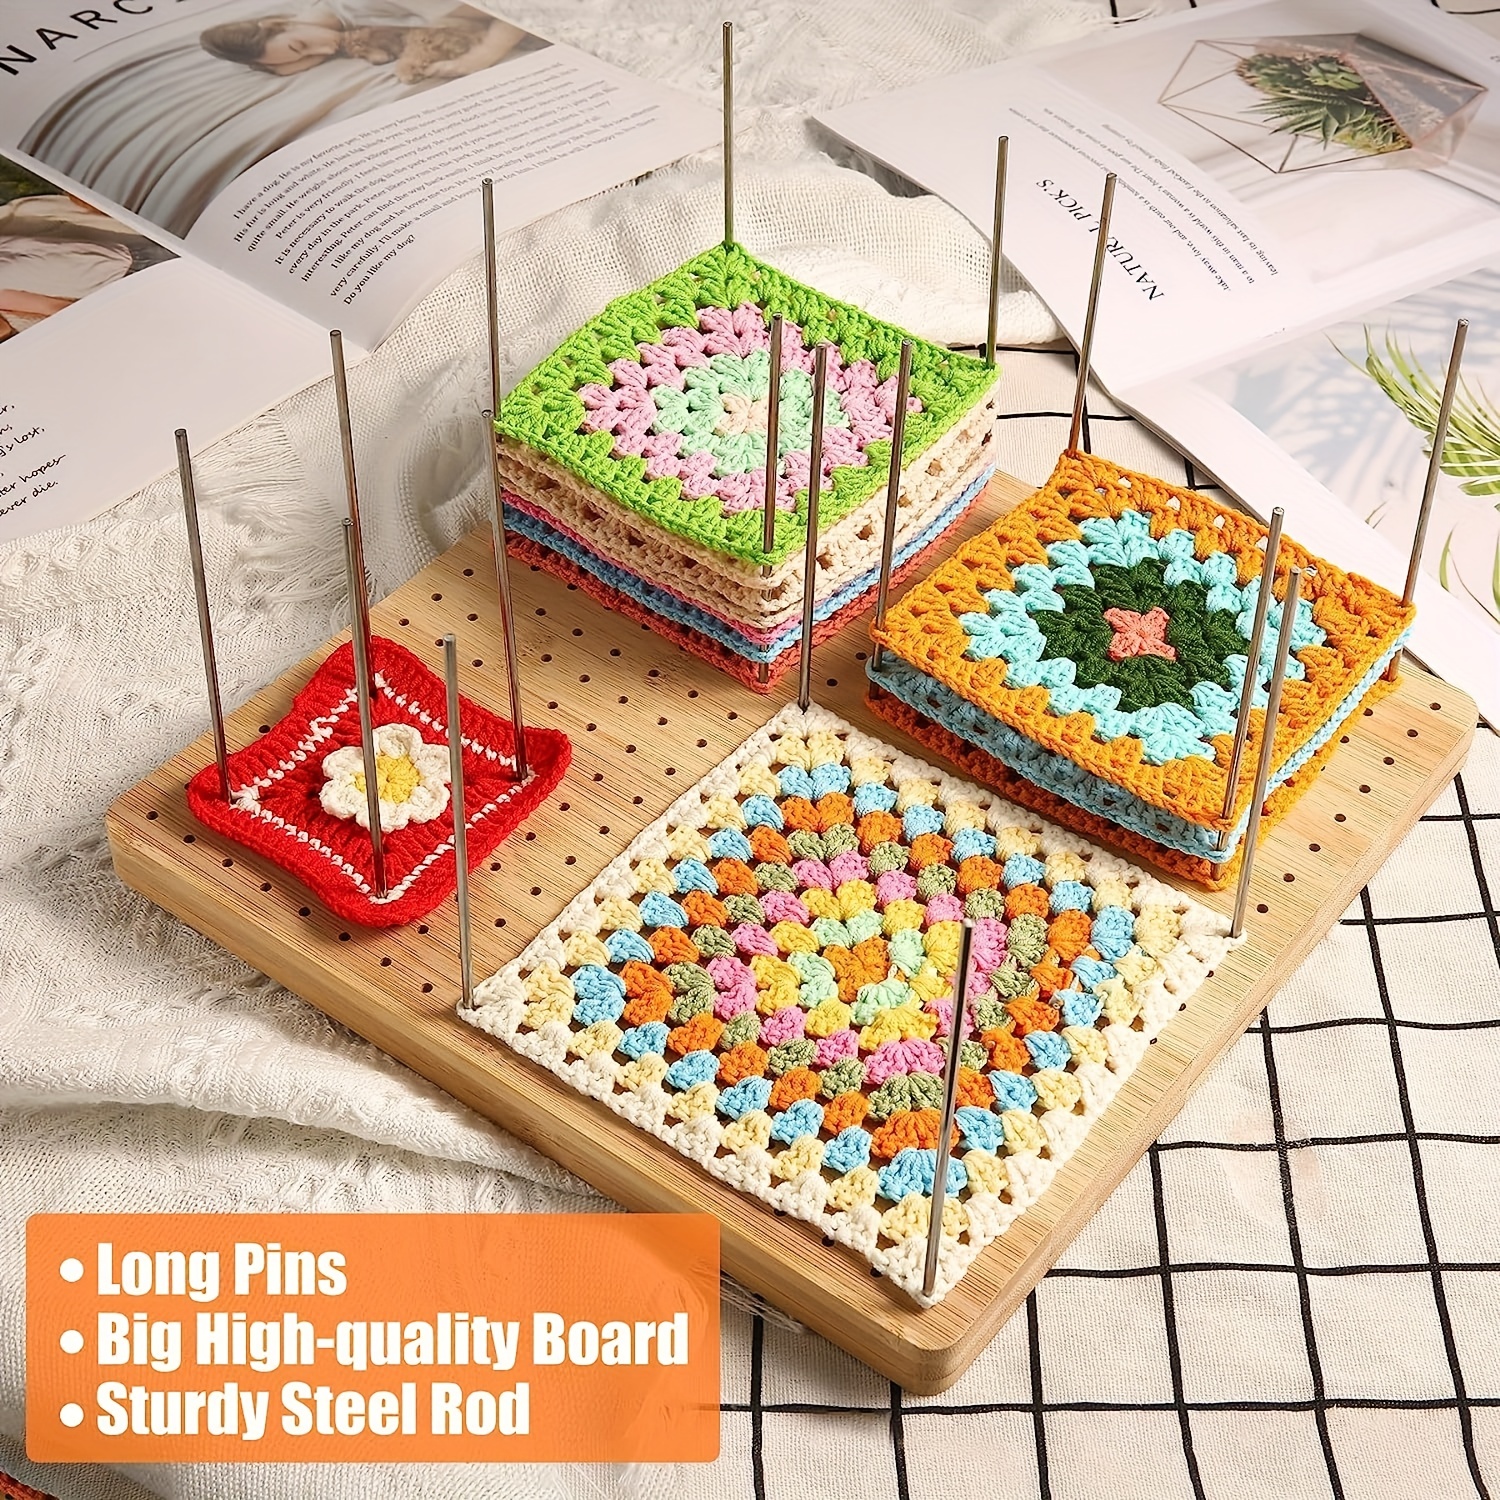 9.3 inch Crochet Square Blocking Board, Crochet Blocking Board with Pins 20pcs Stainless Pins, Handcrafted Wood Crochet Blocking Board for Crochet